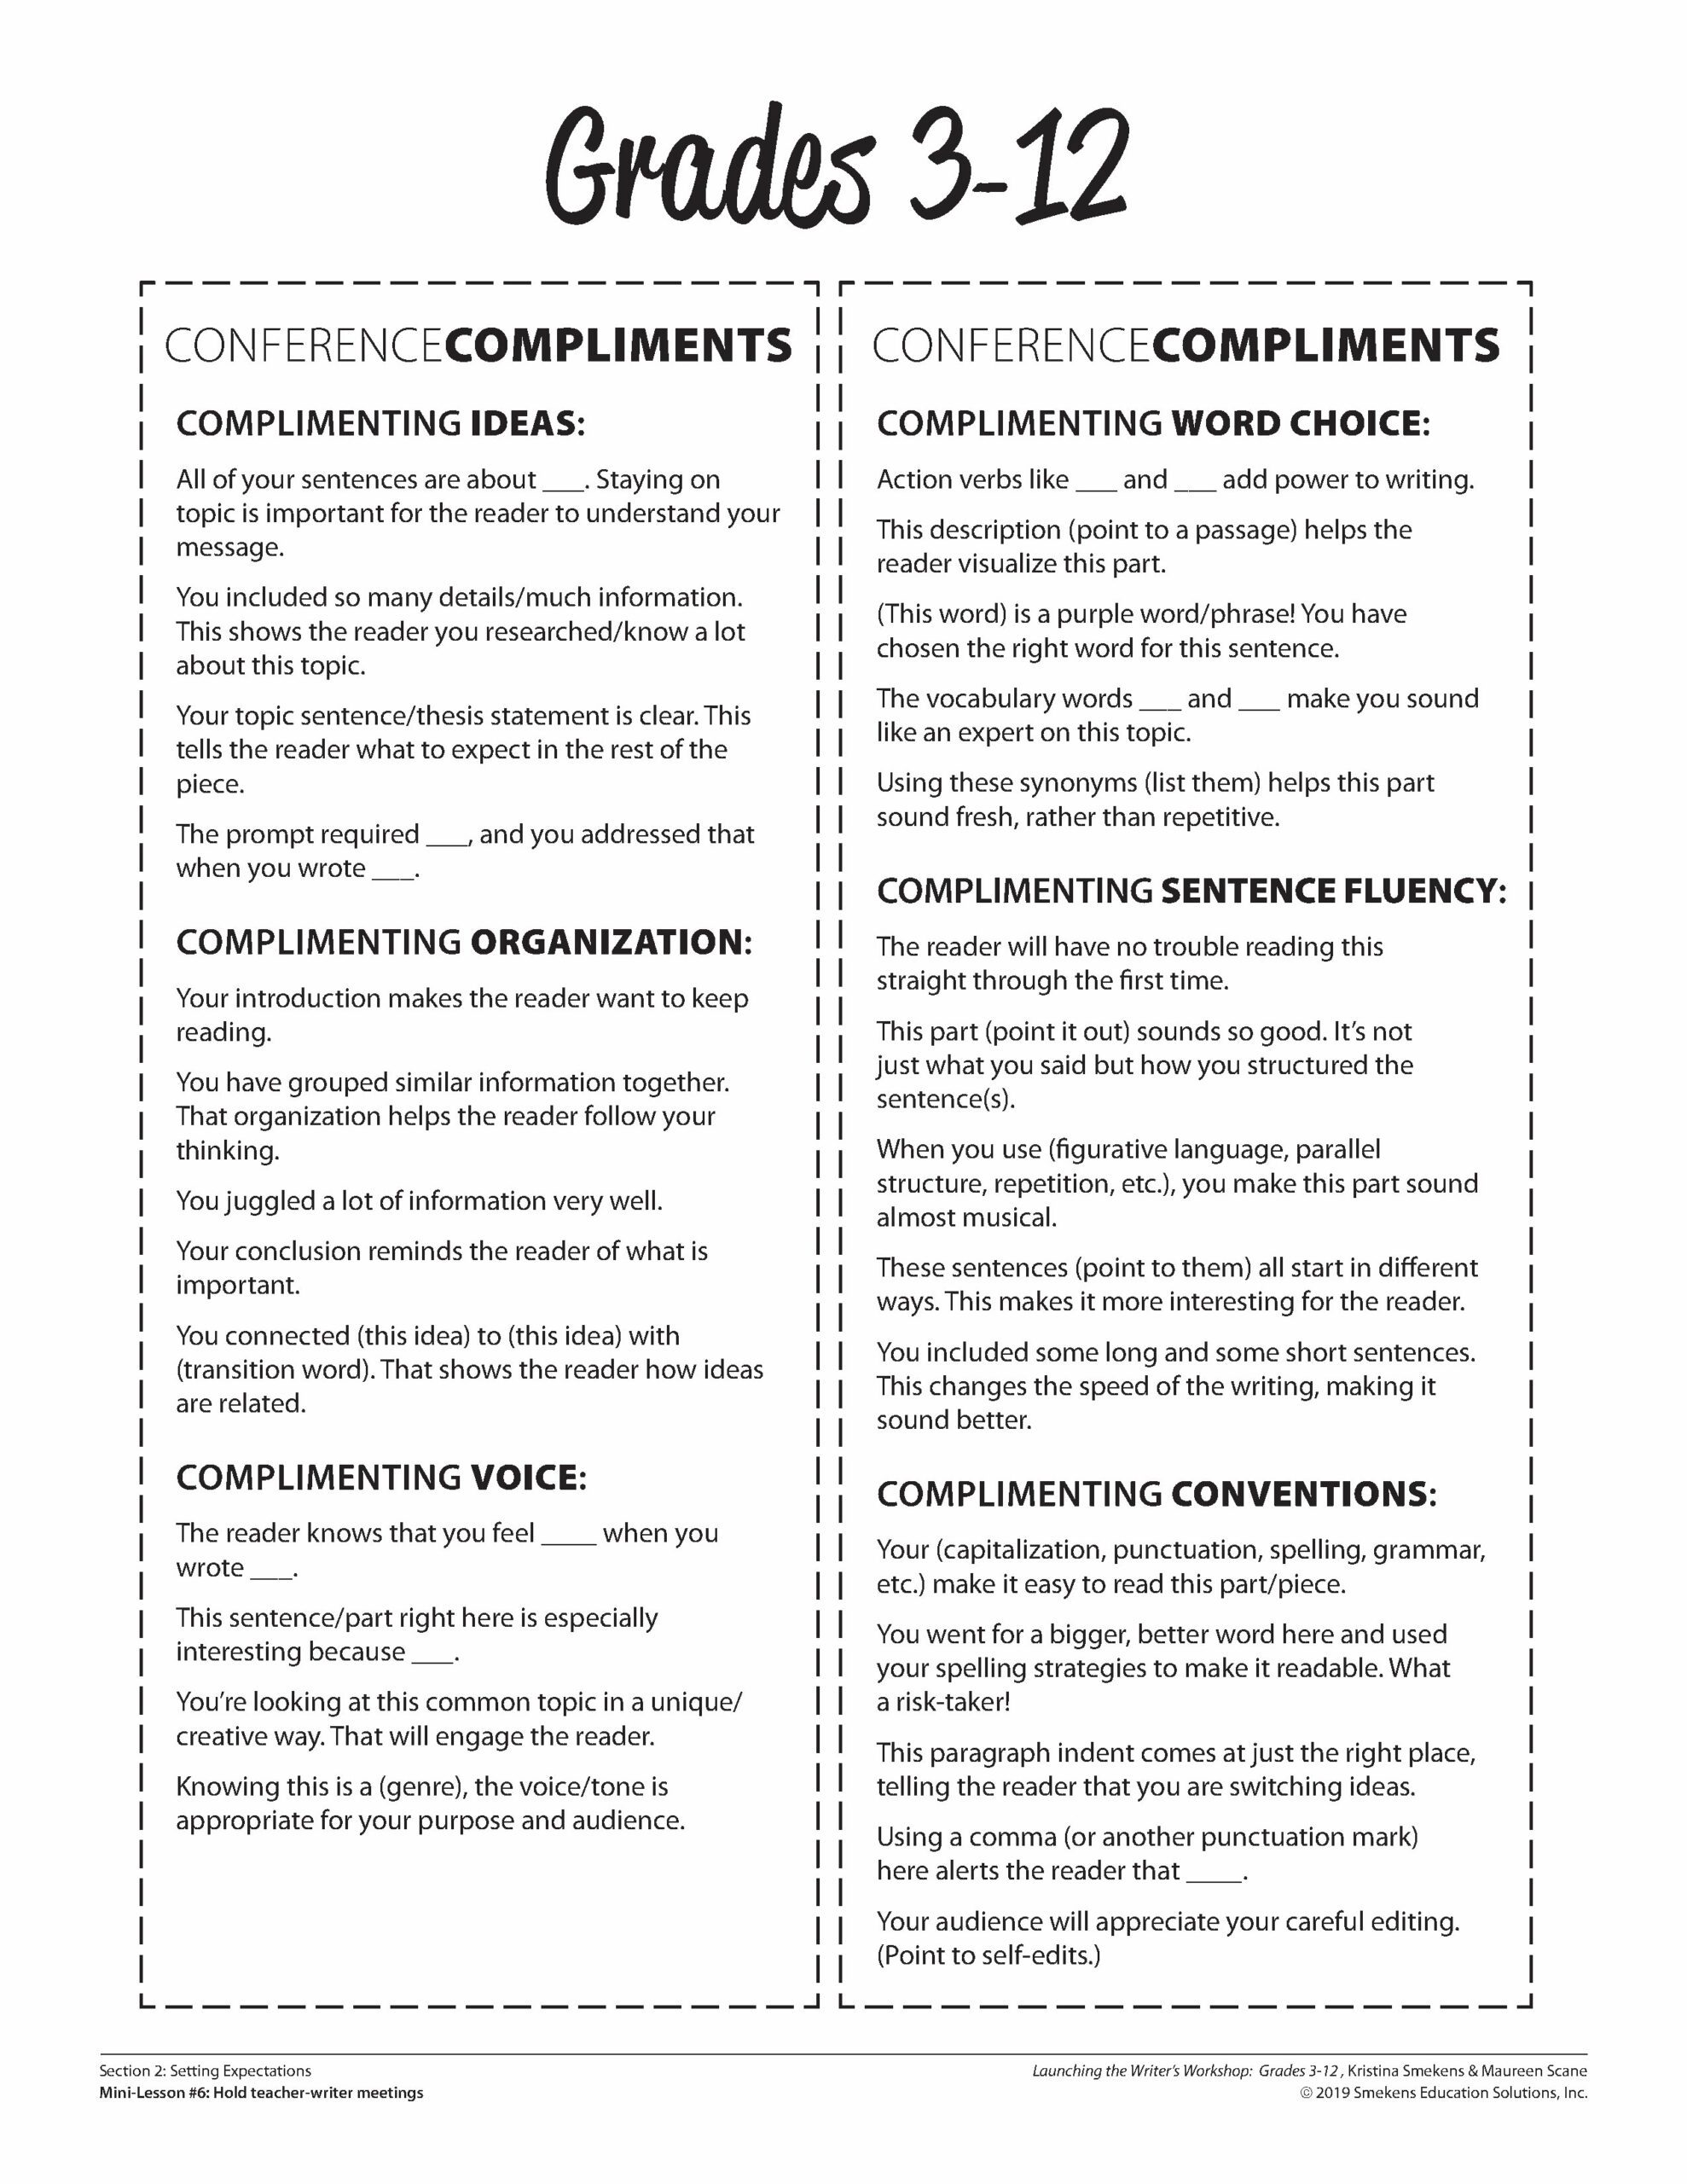 Grades 3-12 - Writer Conference Compliments - Teacher Resource